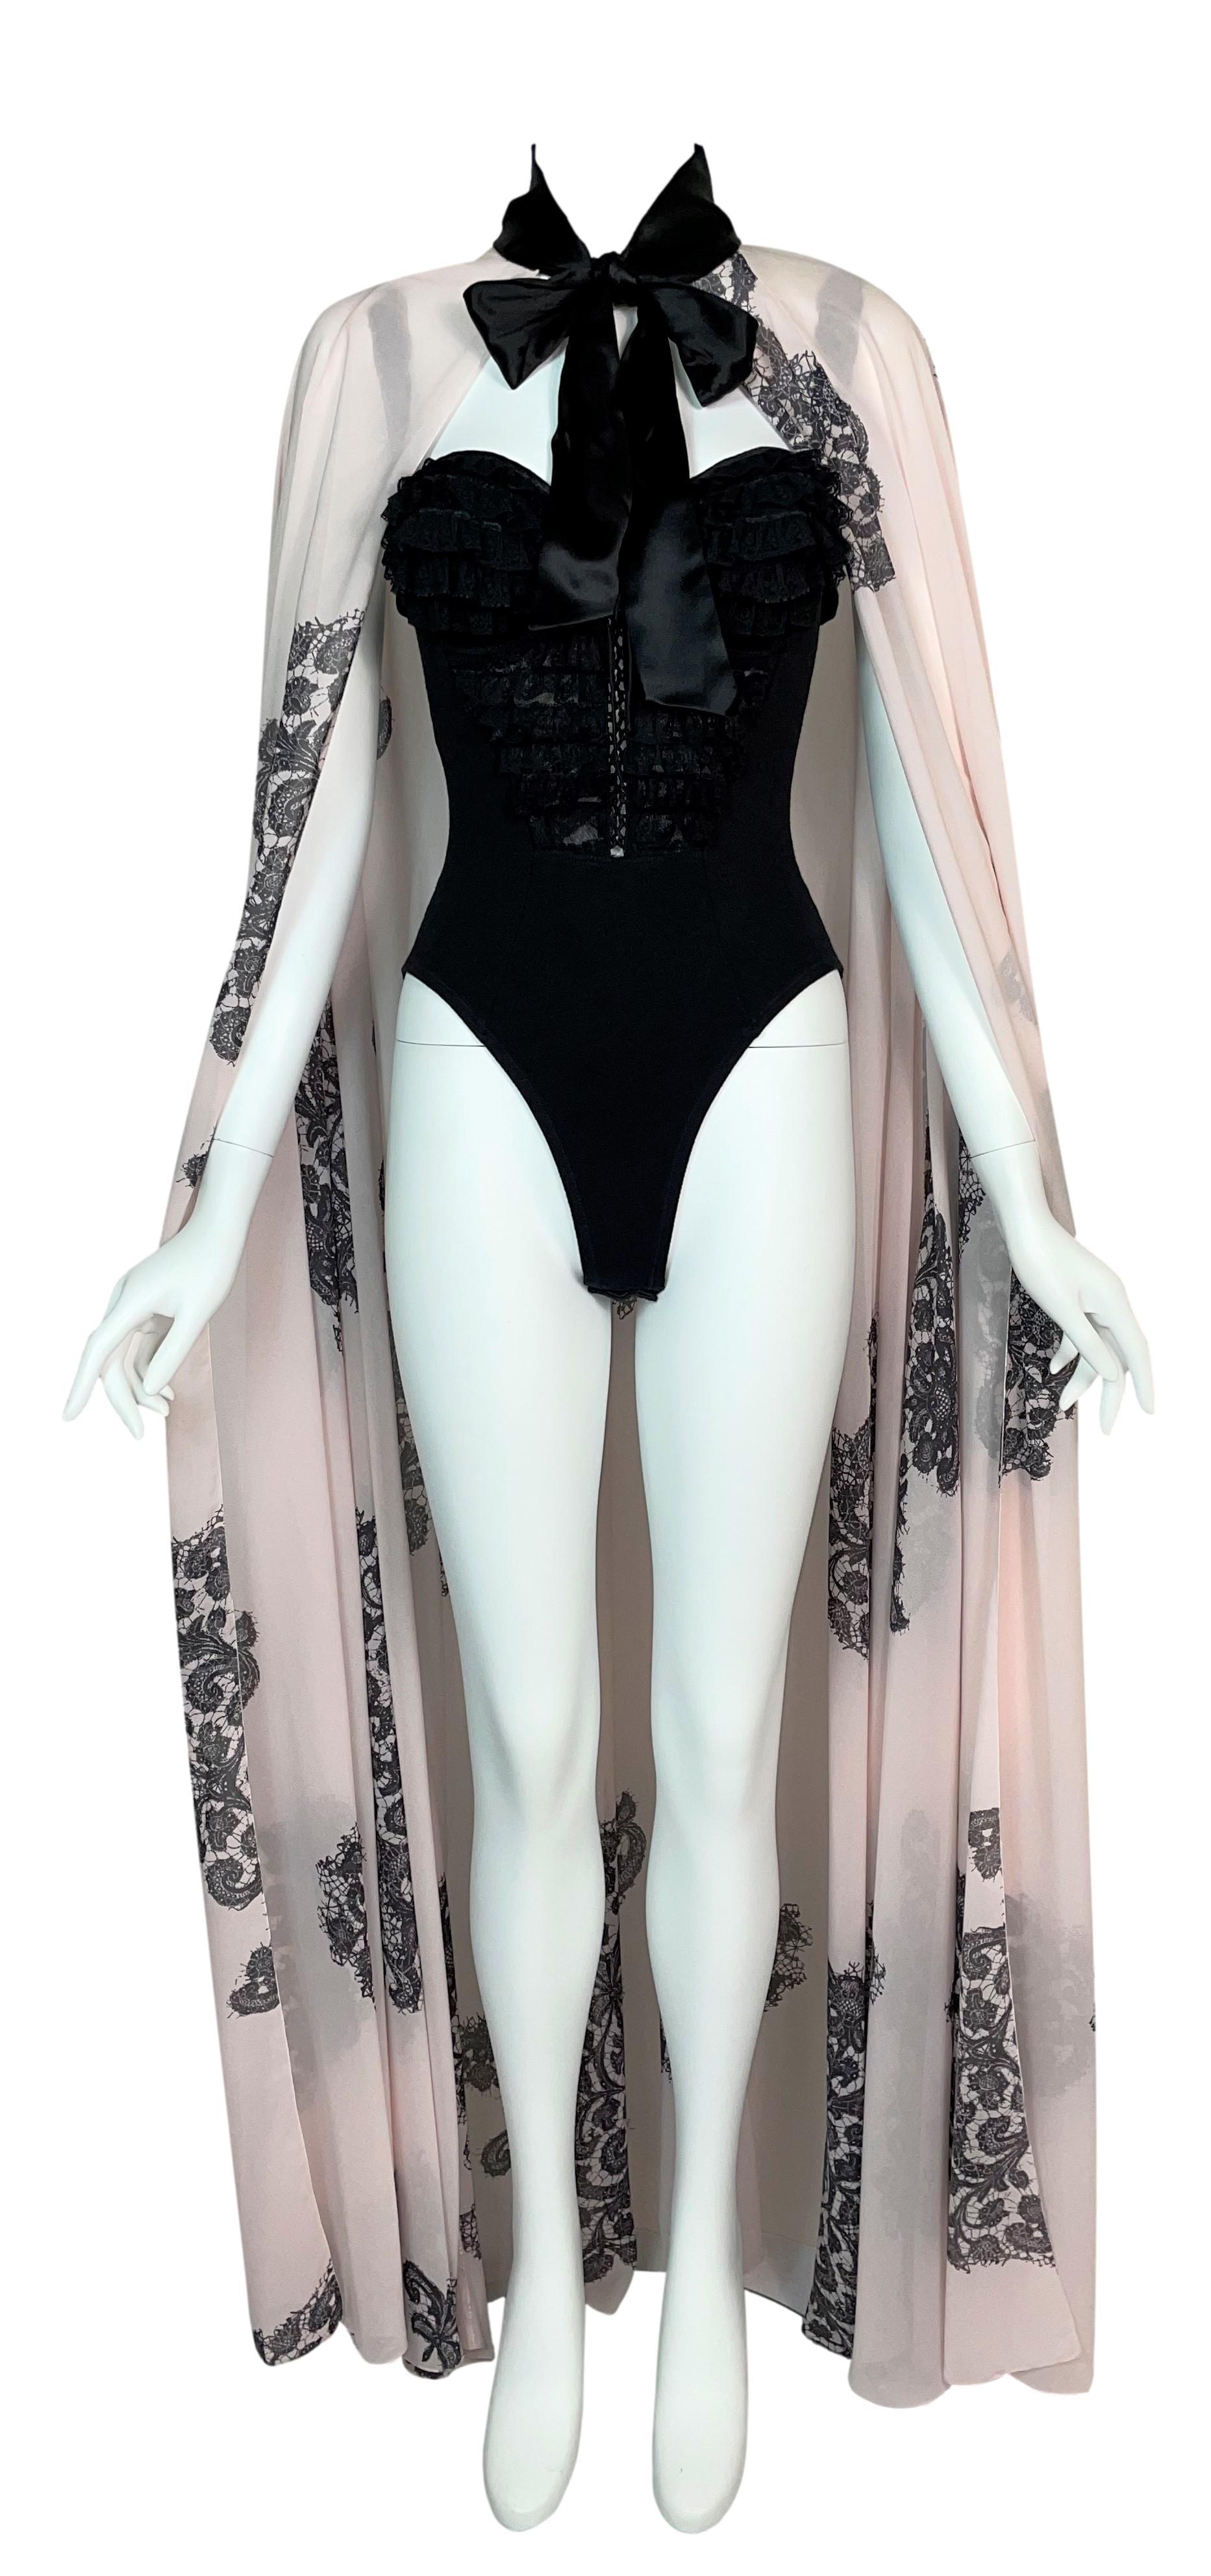 **THANK YOU FOR SHOPPING WITH MES DEUX FILLES**

DESIGNER: S/S 1993 Chantal Thomass- bodysuit was shown on the runway- cape is a very rare piece!
CONDITION: Good- flawless!
FABRIC: Cape is unknown- bodysuit is a cotton/spandex blend
COUNTRY: